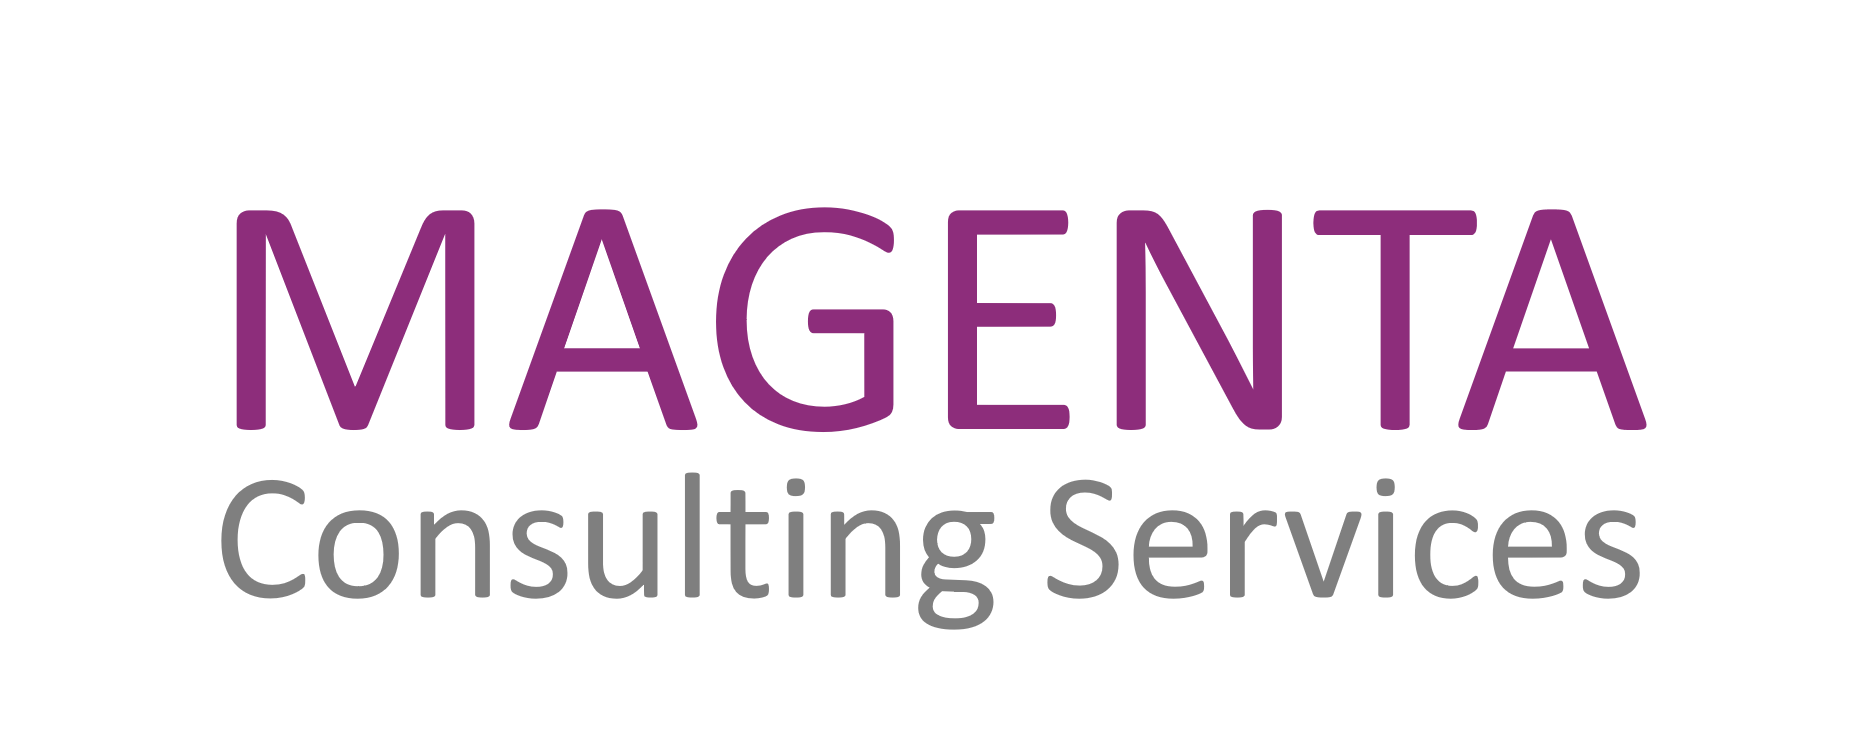 Company logo for Magenta Consulting Services Pte. Ltd.